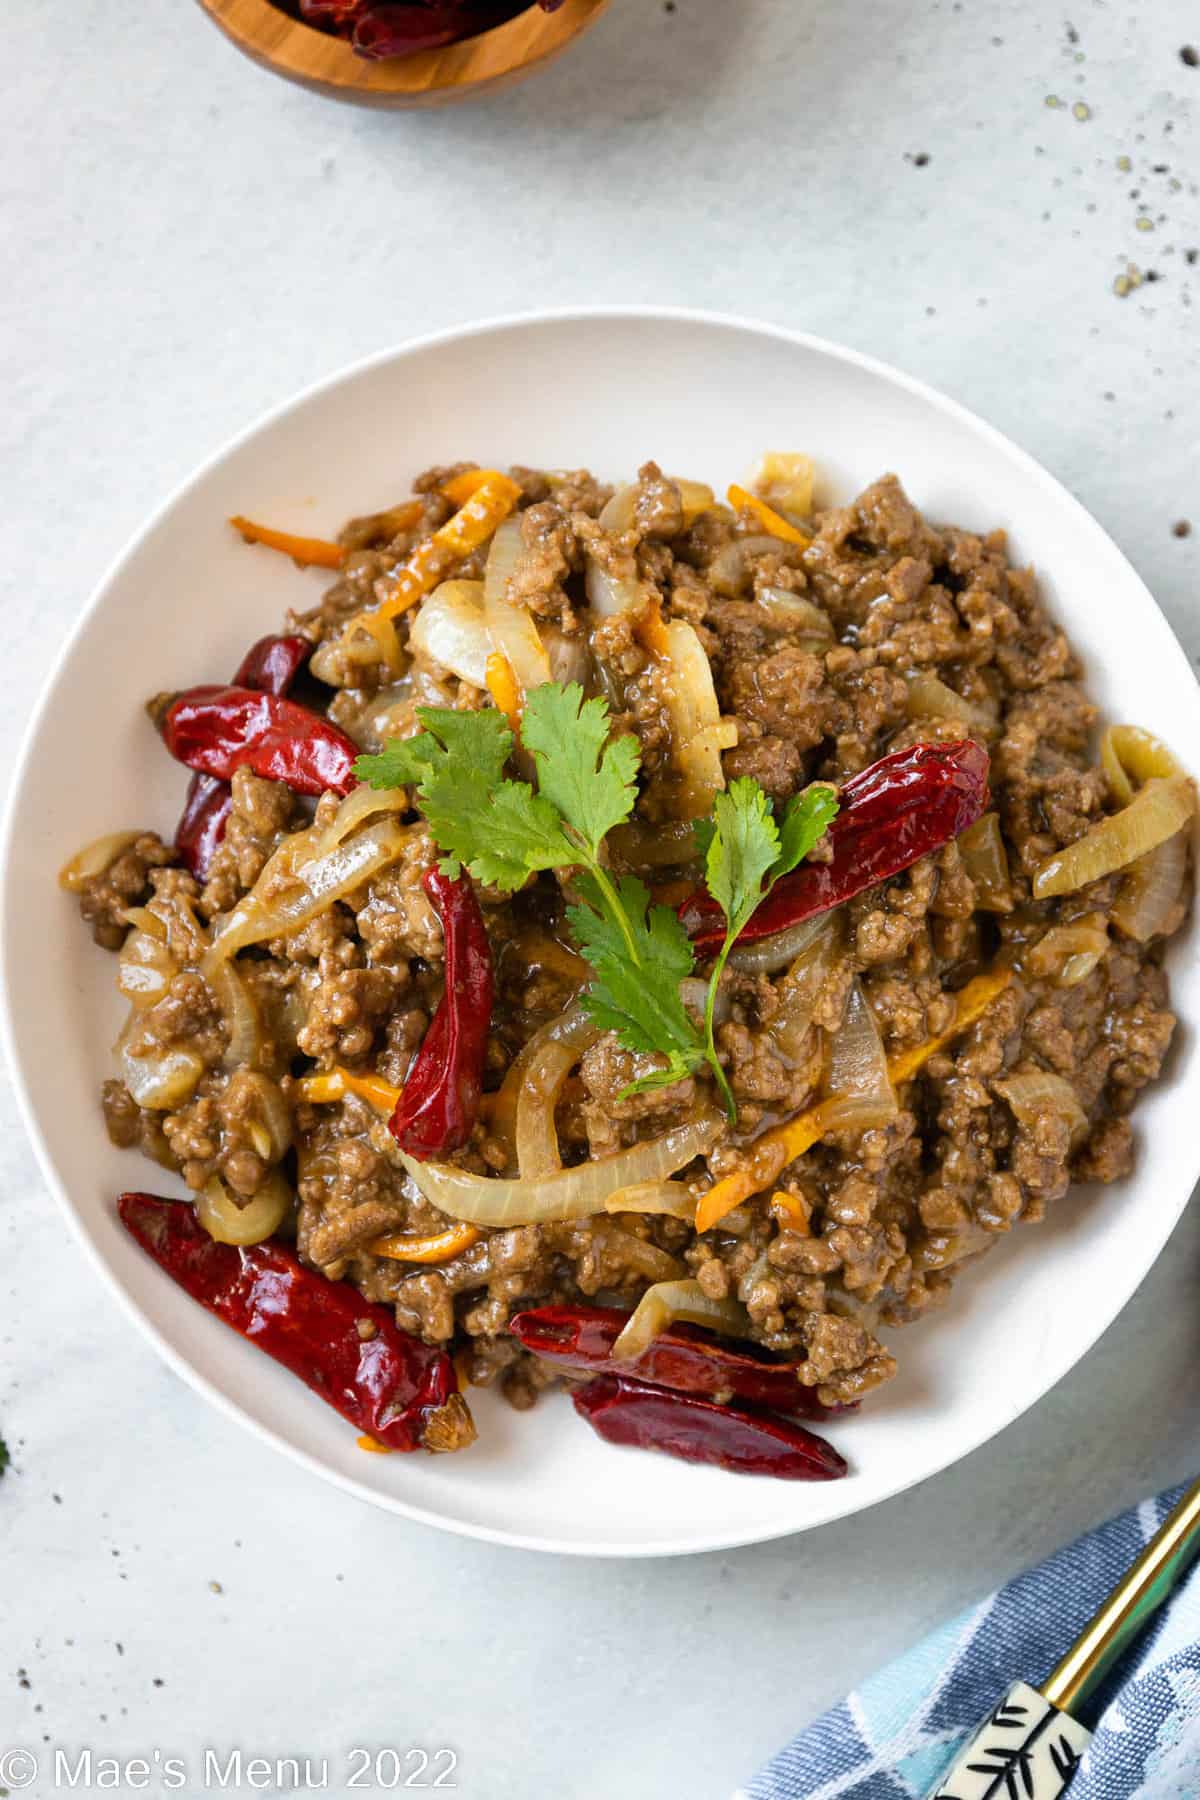 A white erving bowl of ground beef stir fry with cilantro.